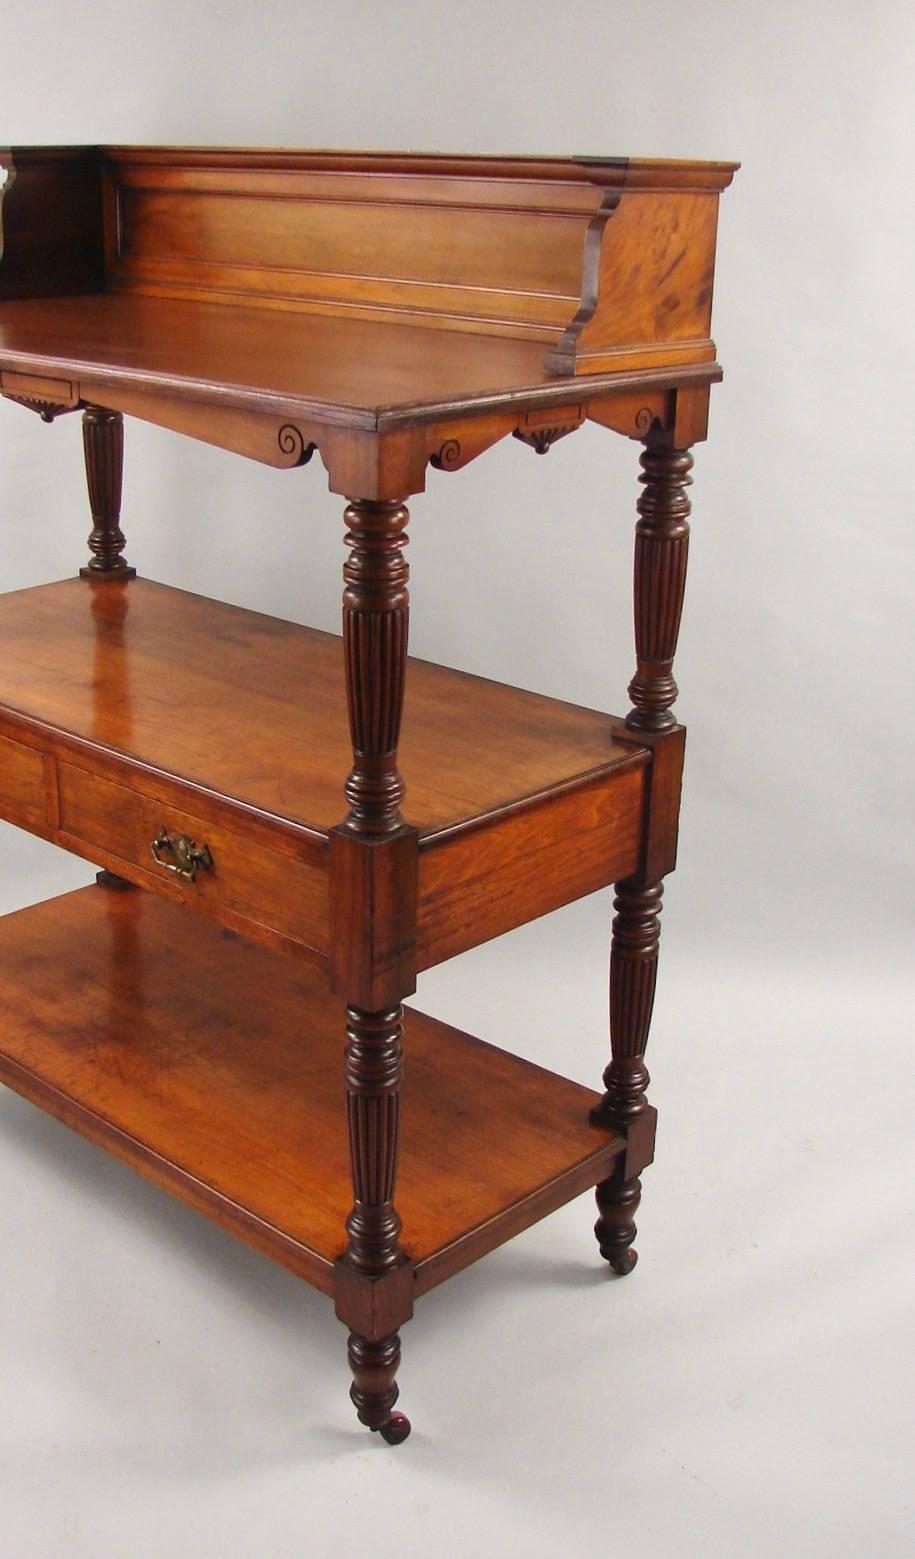 A good quality English Victorian period walnut three-tier server of architectural form, the galleried top above three shelves and two central drawers flanked by fluted columns, resting on turned feet, with brass casters. Labeled on the back S.G.